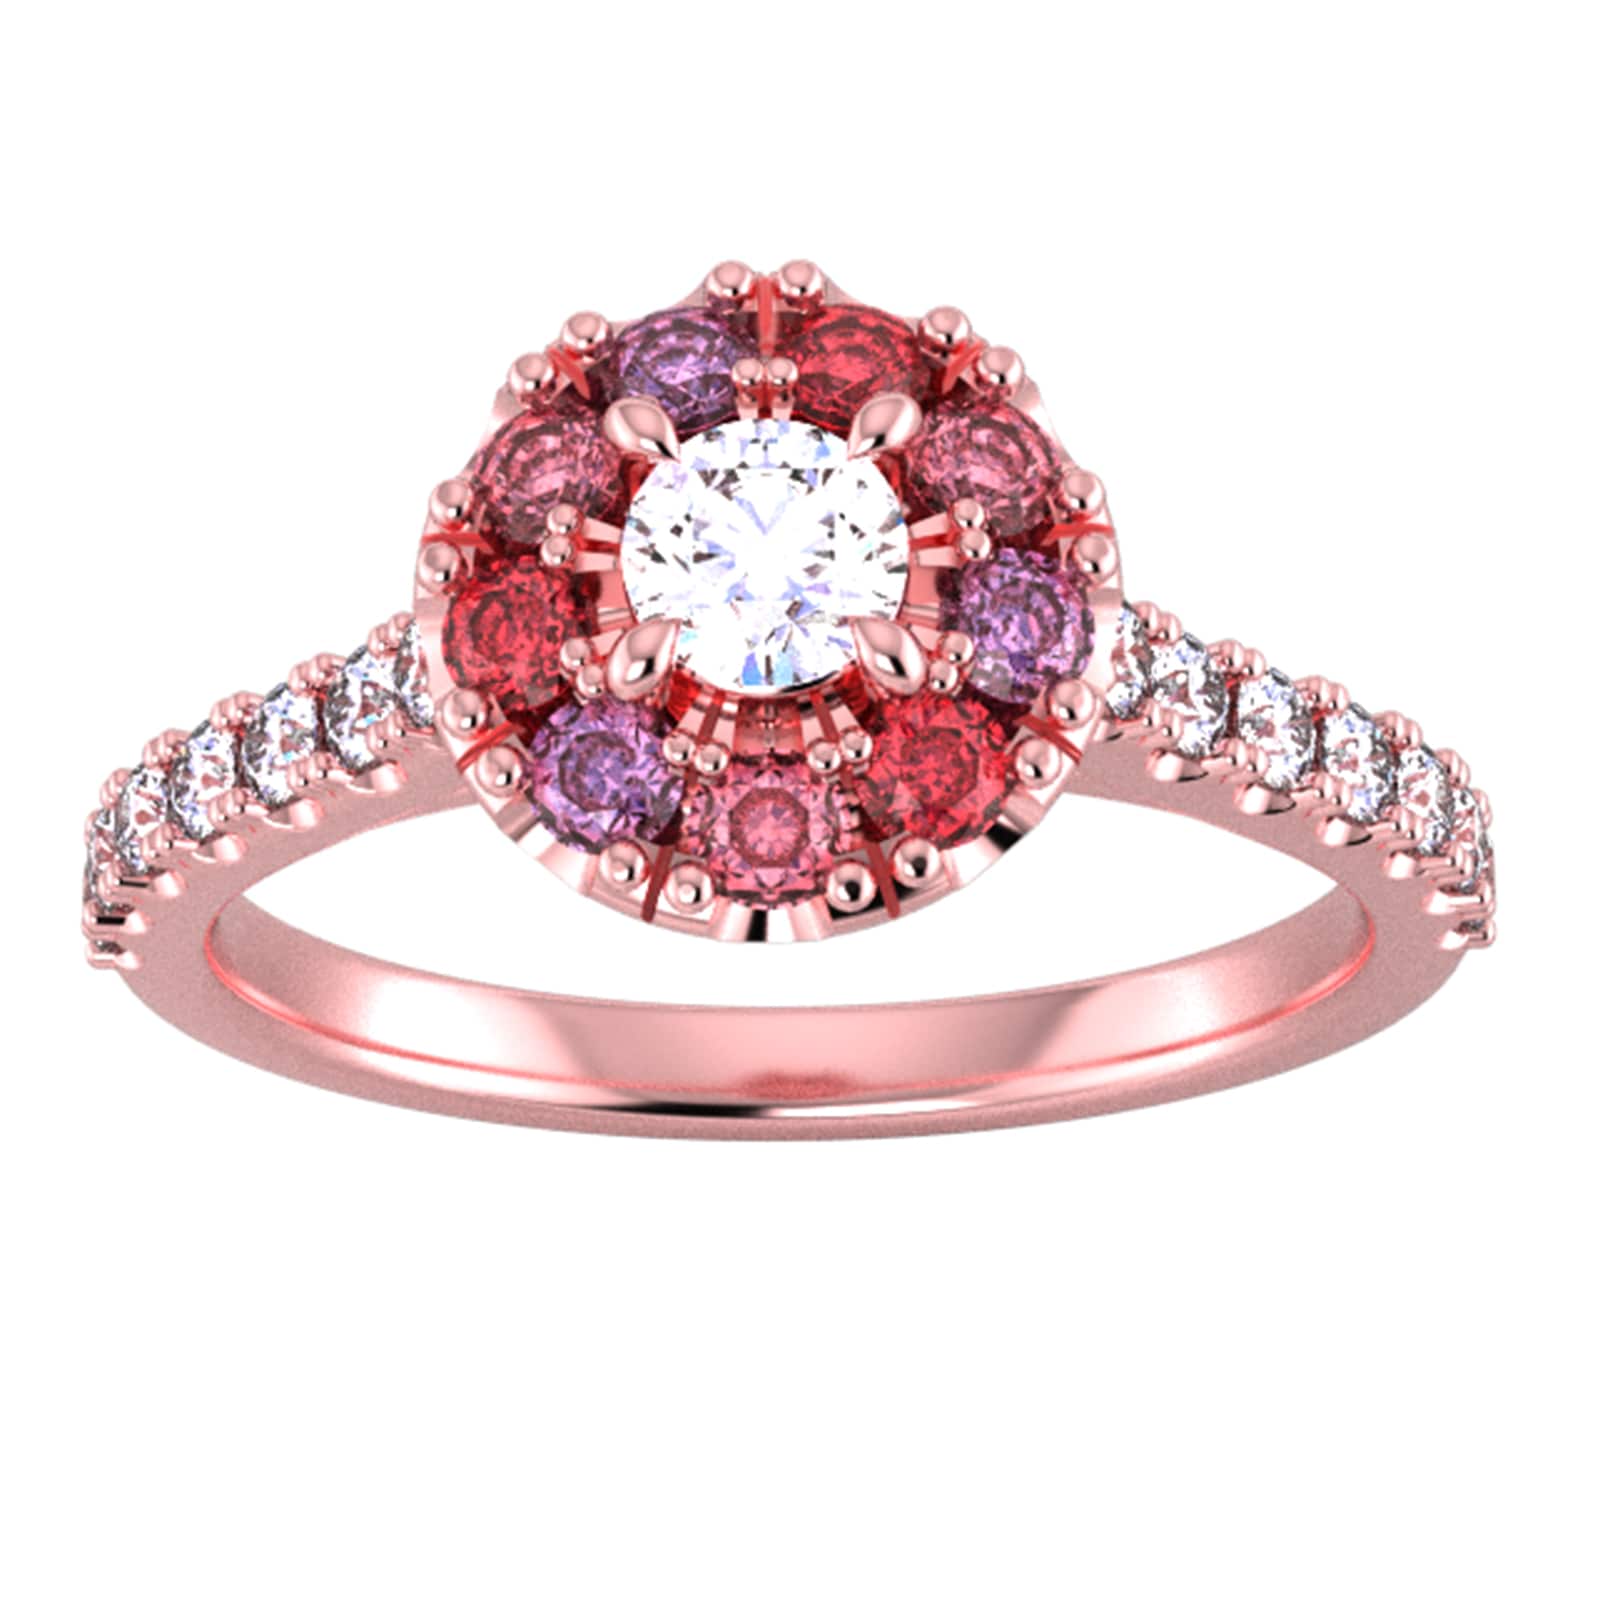 18ct Rose Gold Diamond & Red, Pink, Purple Sapphire Halo Ring - Ring Size G